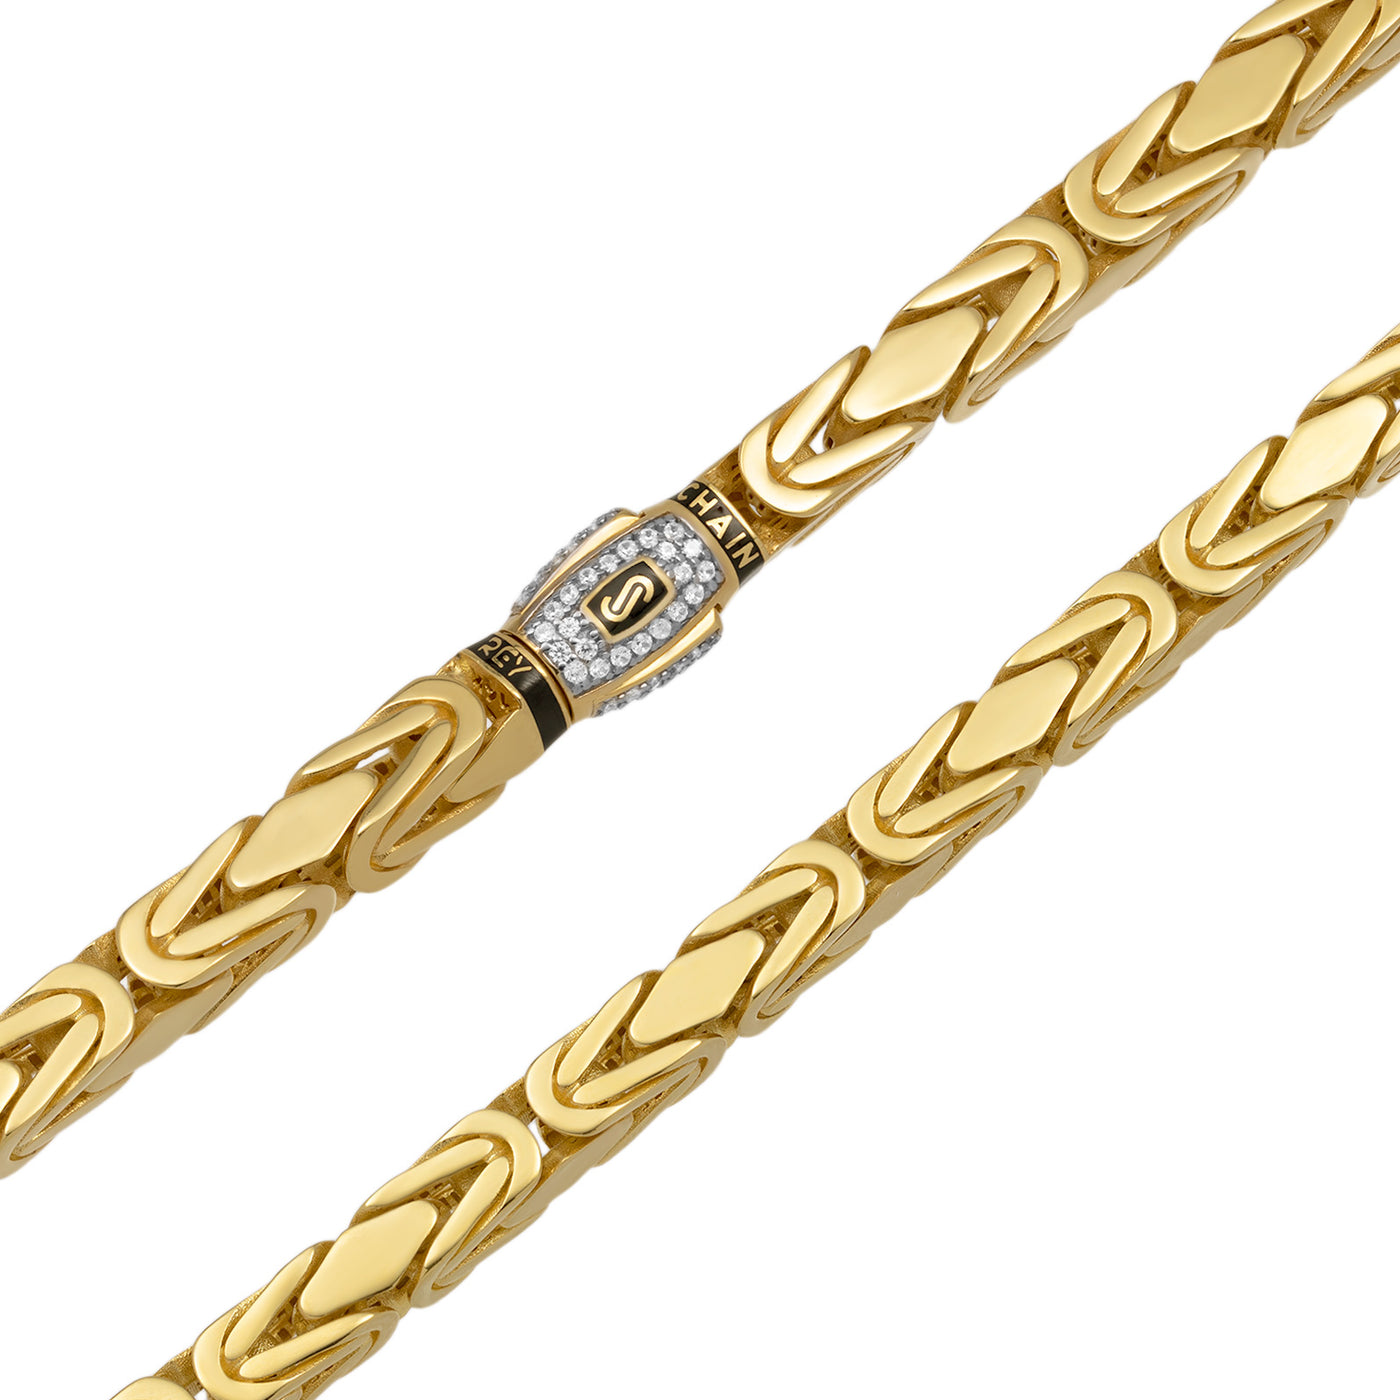 Square Byzantine Royal Link CZ Lock Chain Necklace 14K Yellow Gold - Hollow